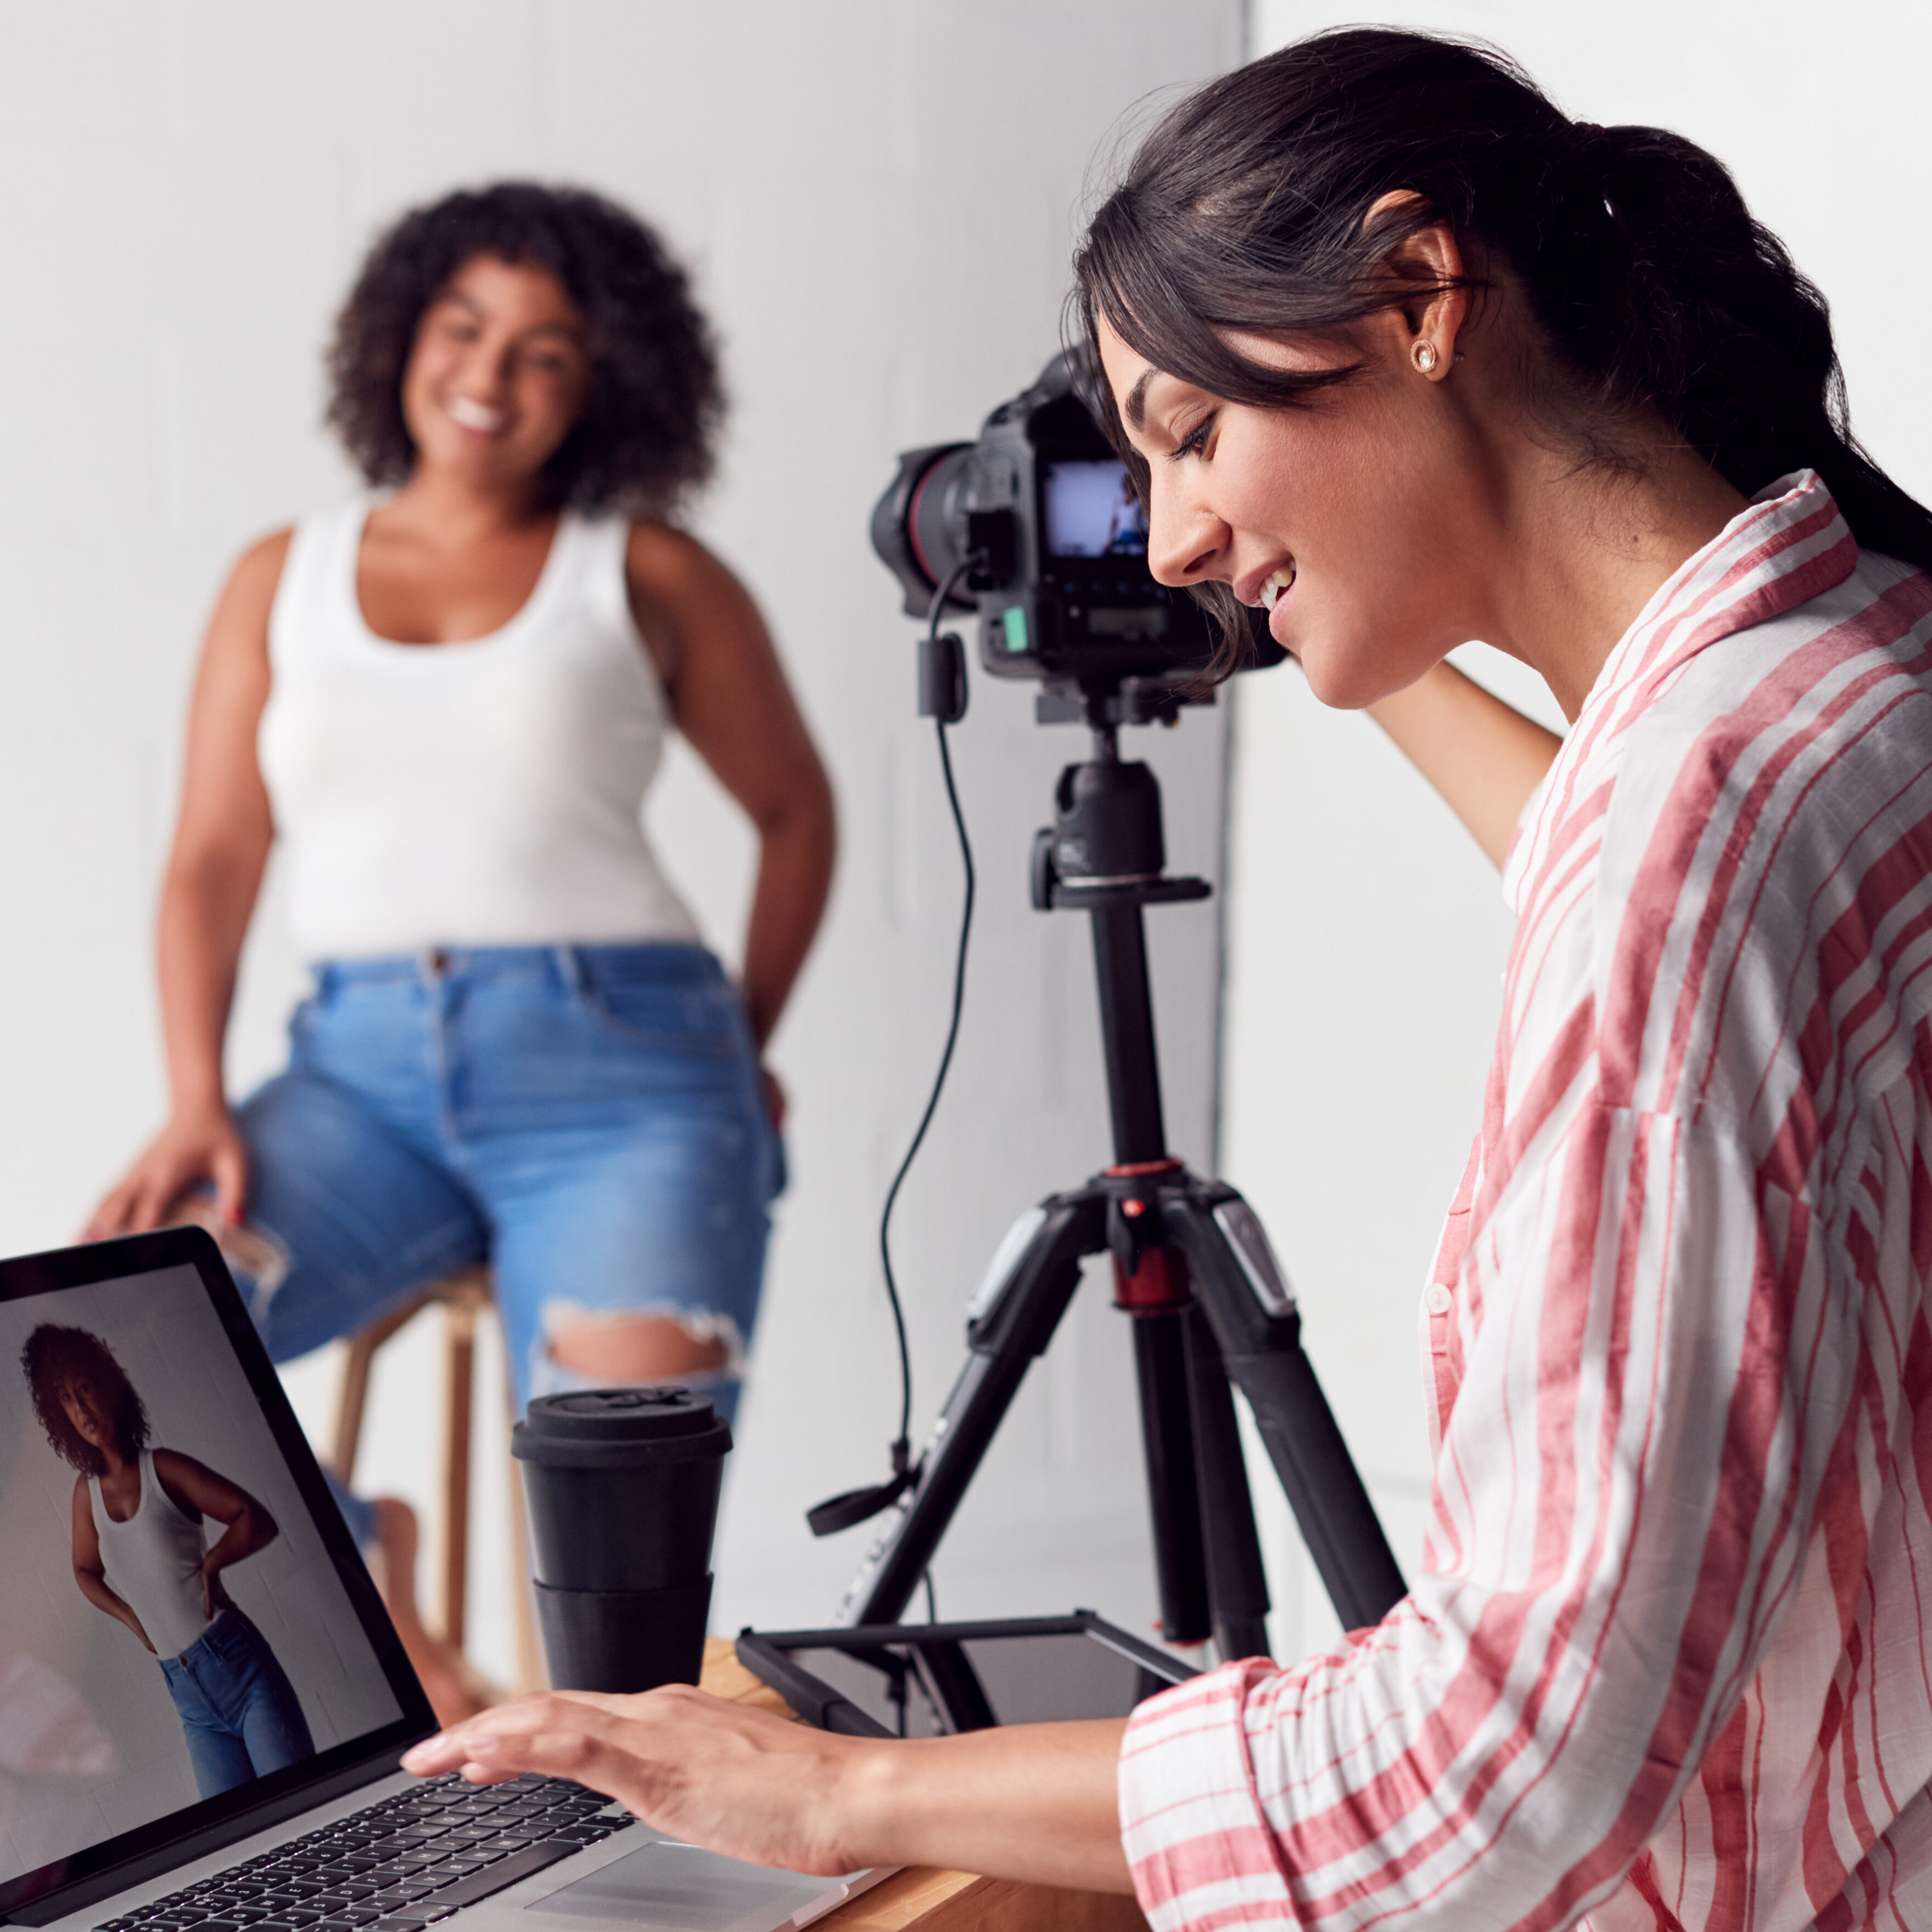 Female Photographer In Digital Studio Shooting Images On Camera Tethered To Laptop Computer